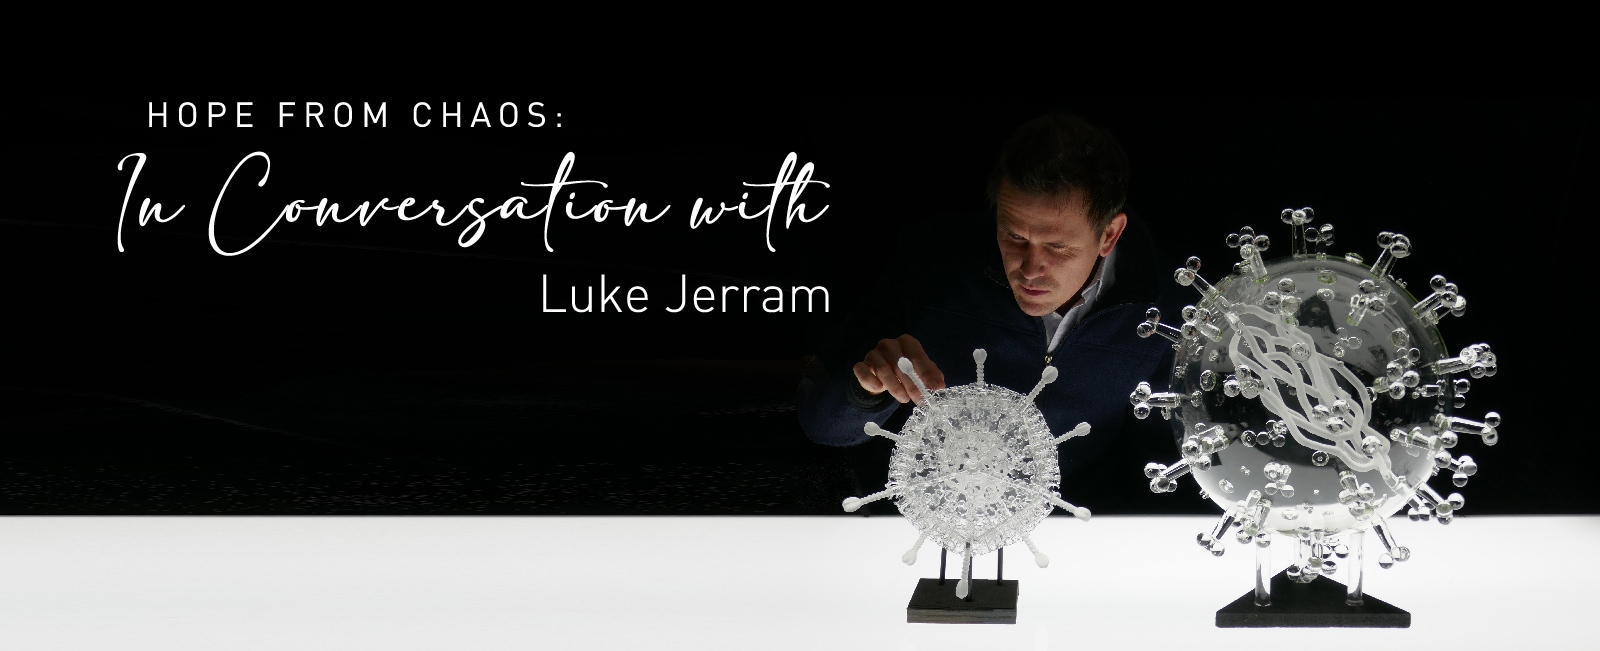 Hope from Chaos: In Conversation with Luke Jerram